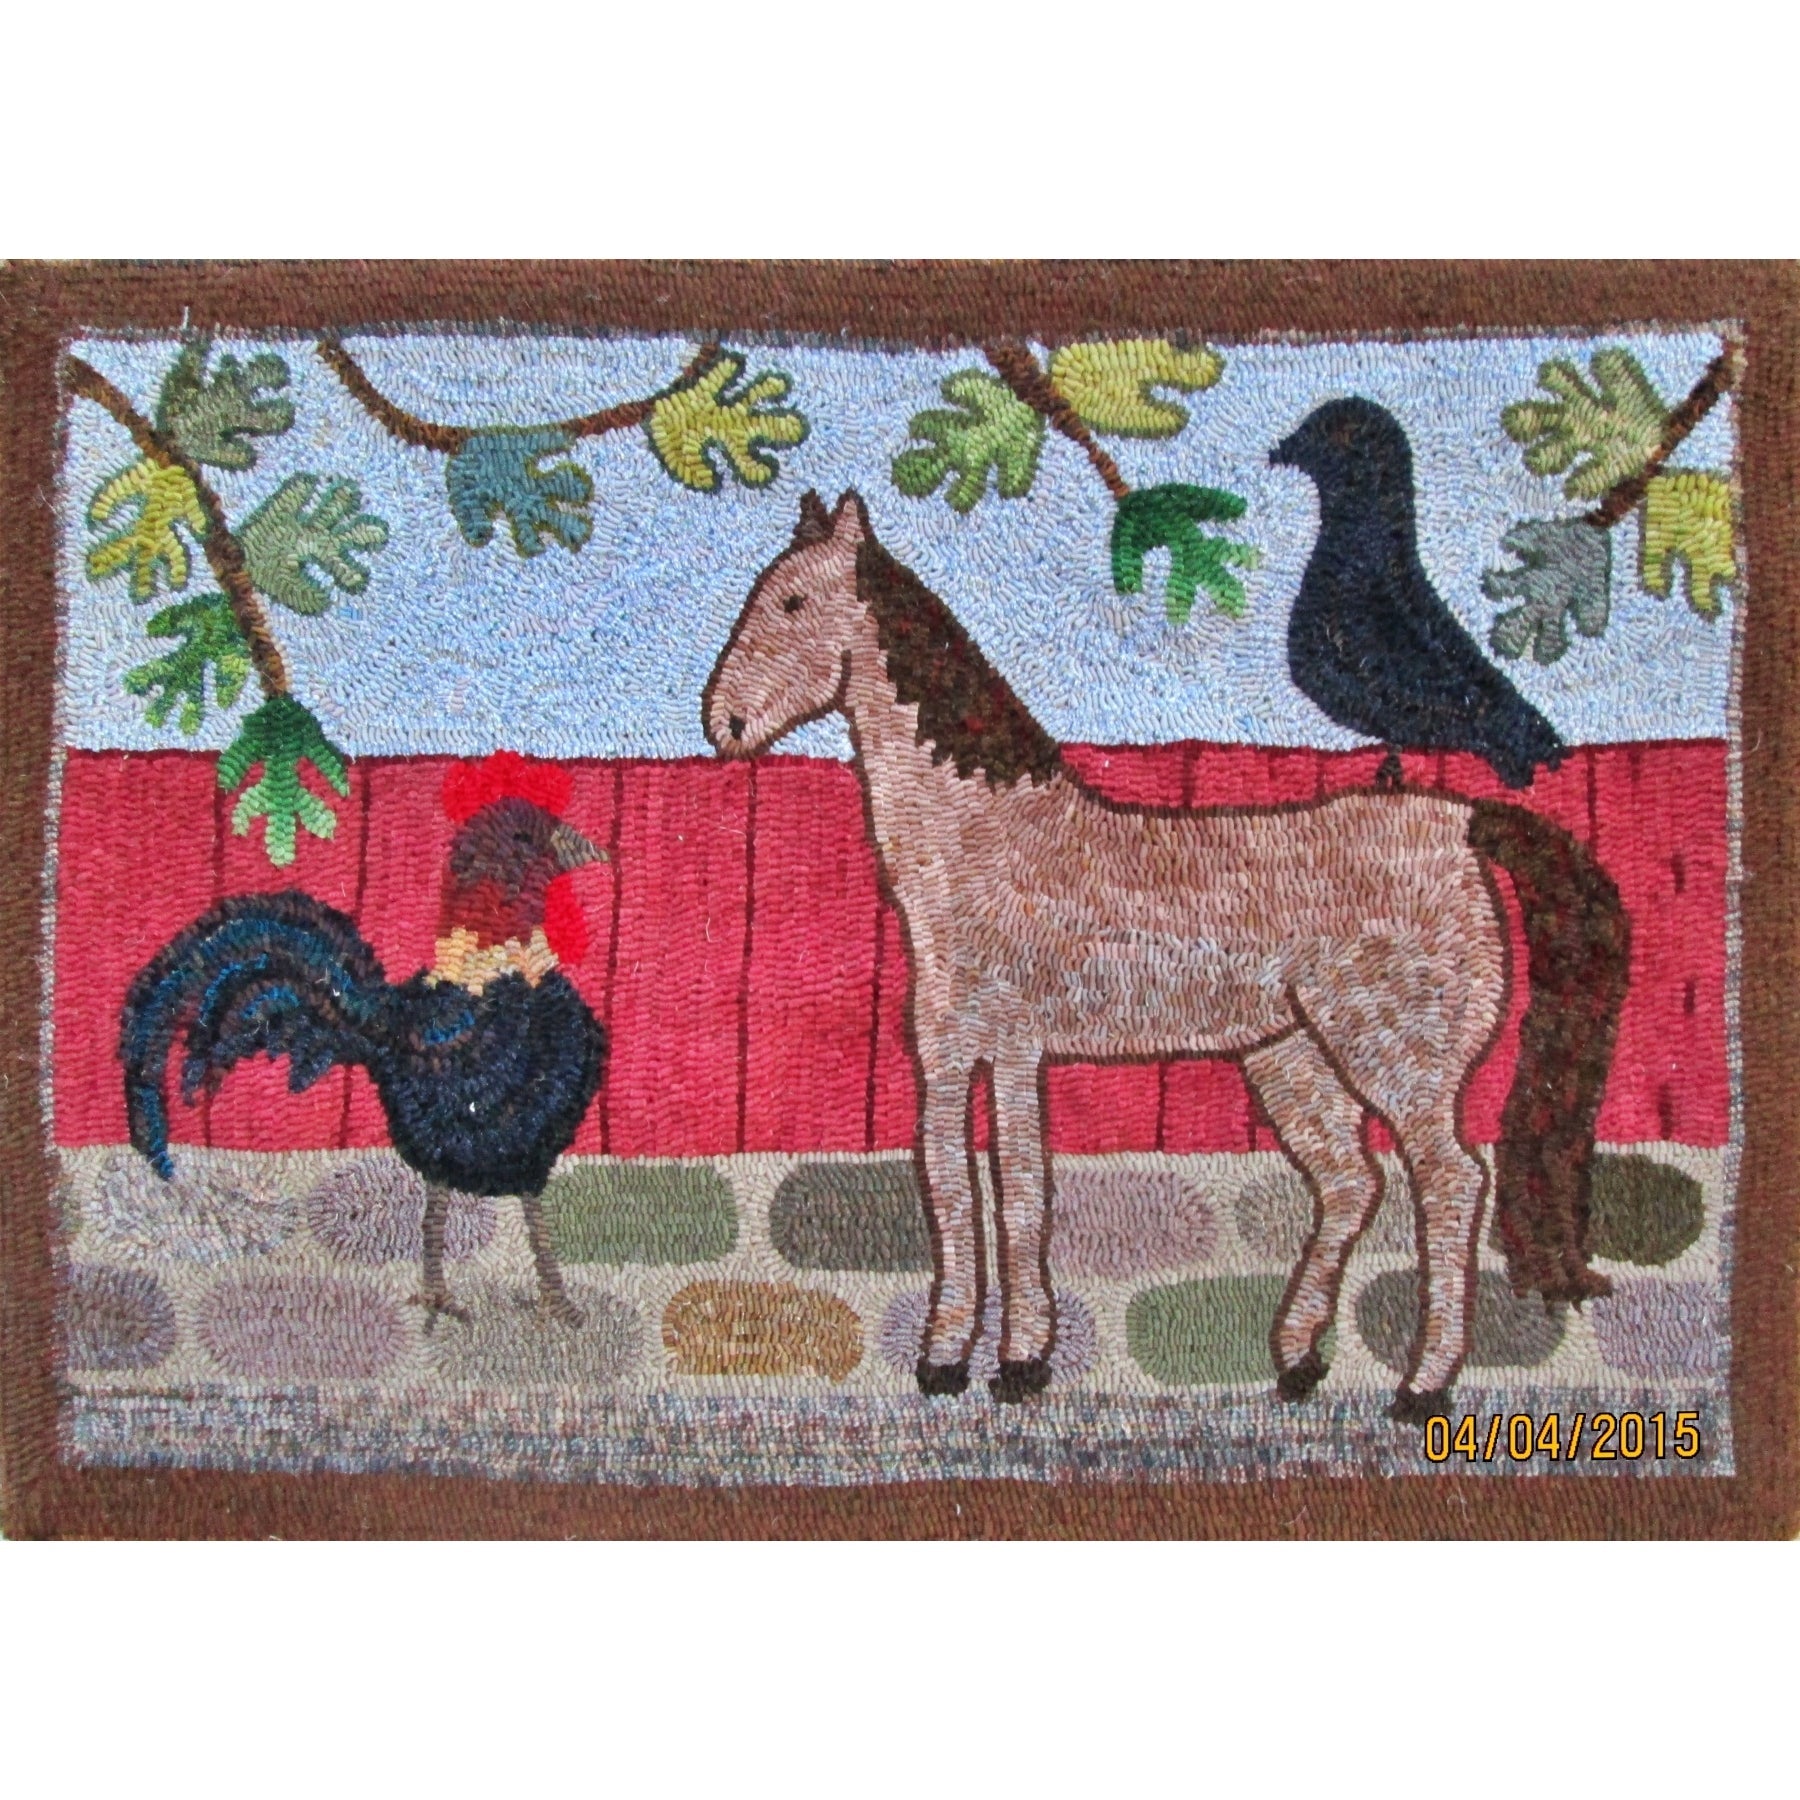 Friends, rug hooked by Norm Bradley